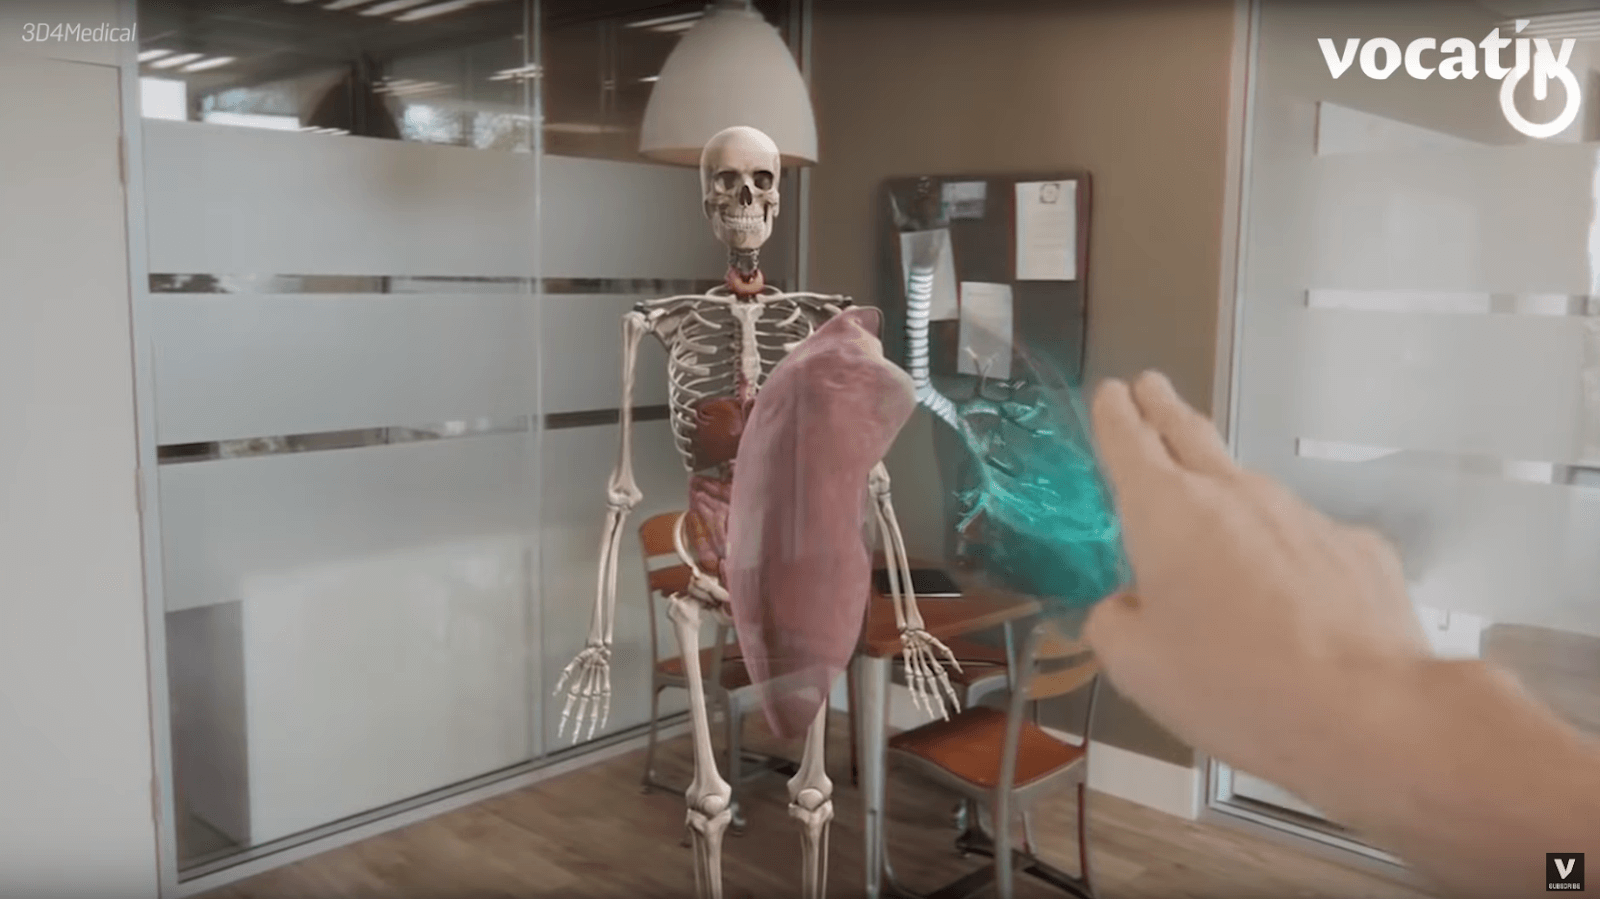 AR in healthcare